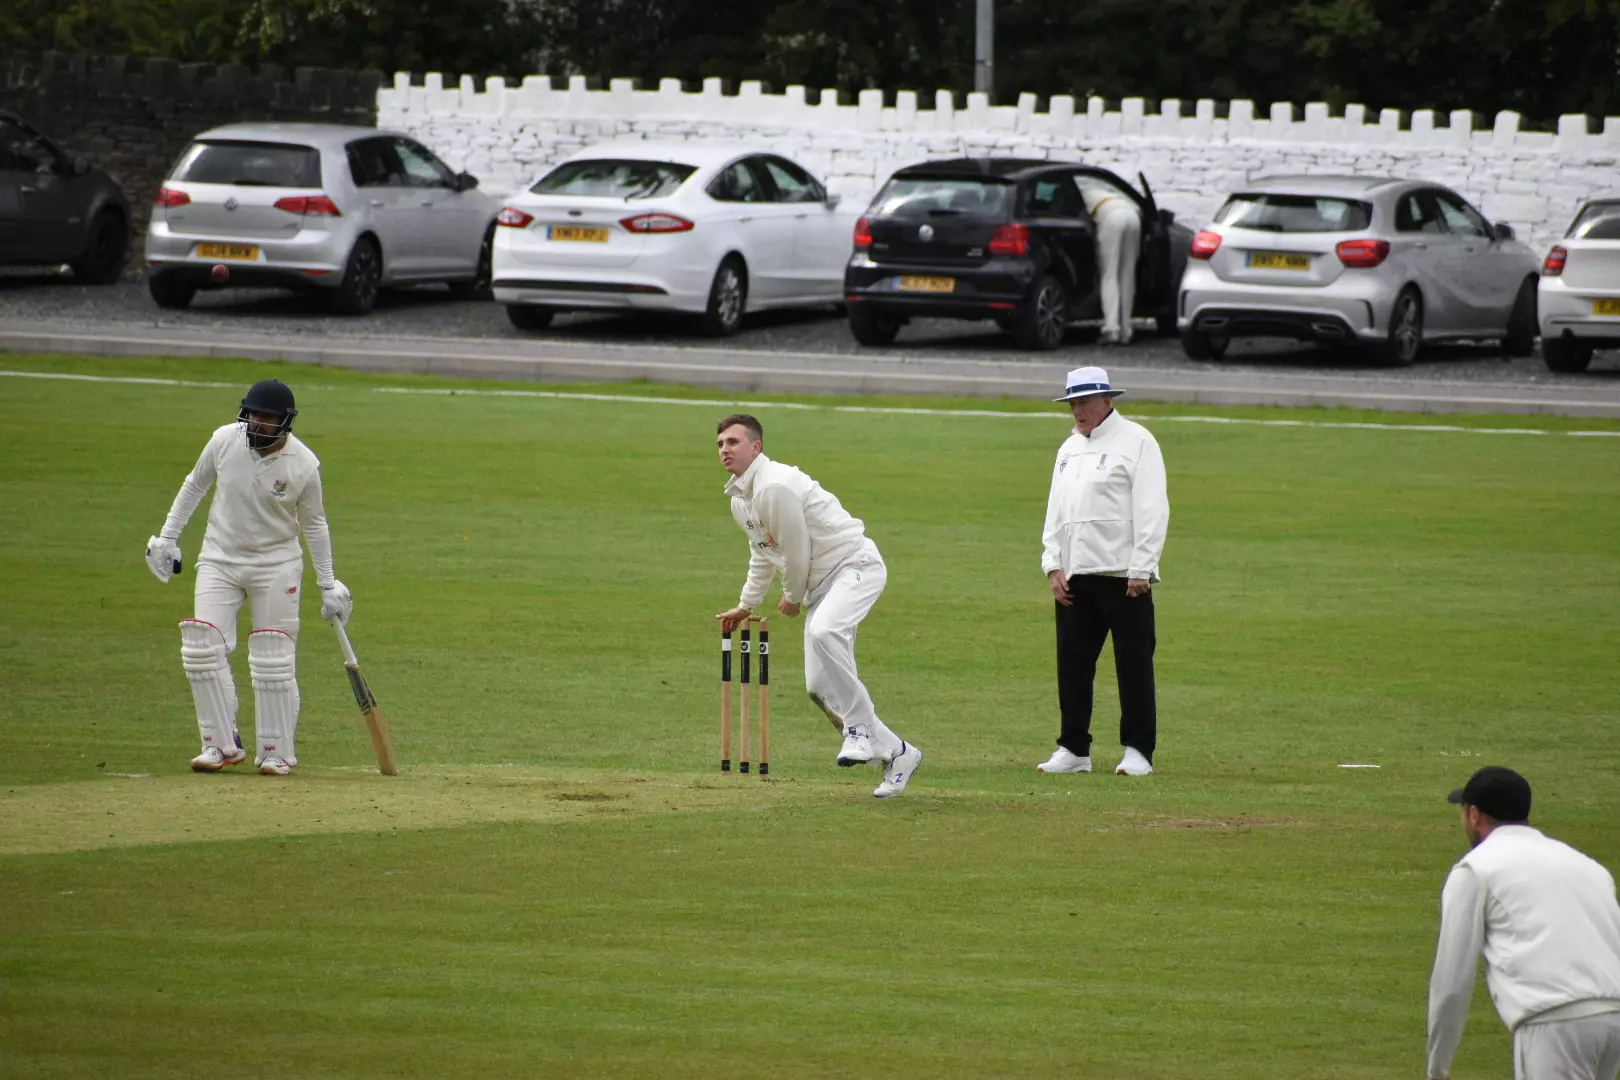 Honley Beat Swaine & Weather To Join Mix - Premiership Day 15 Review